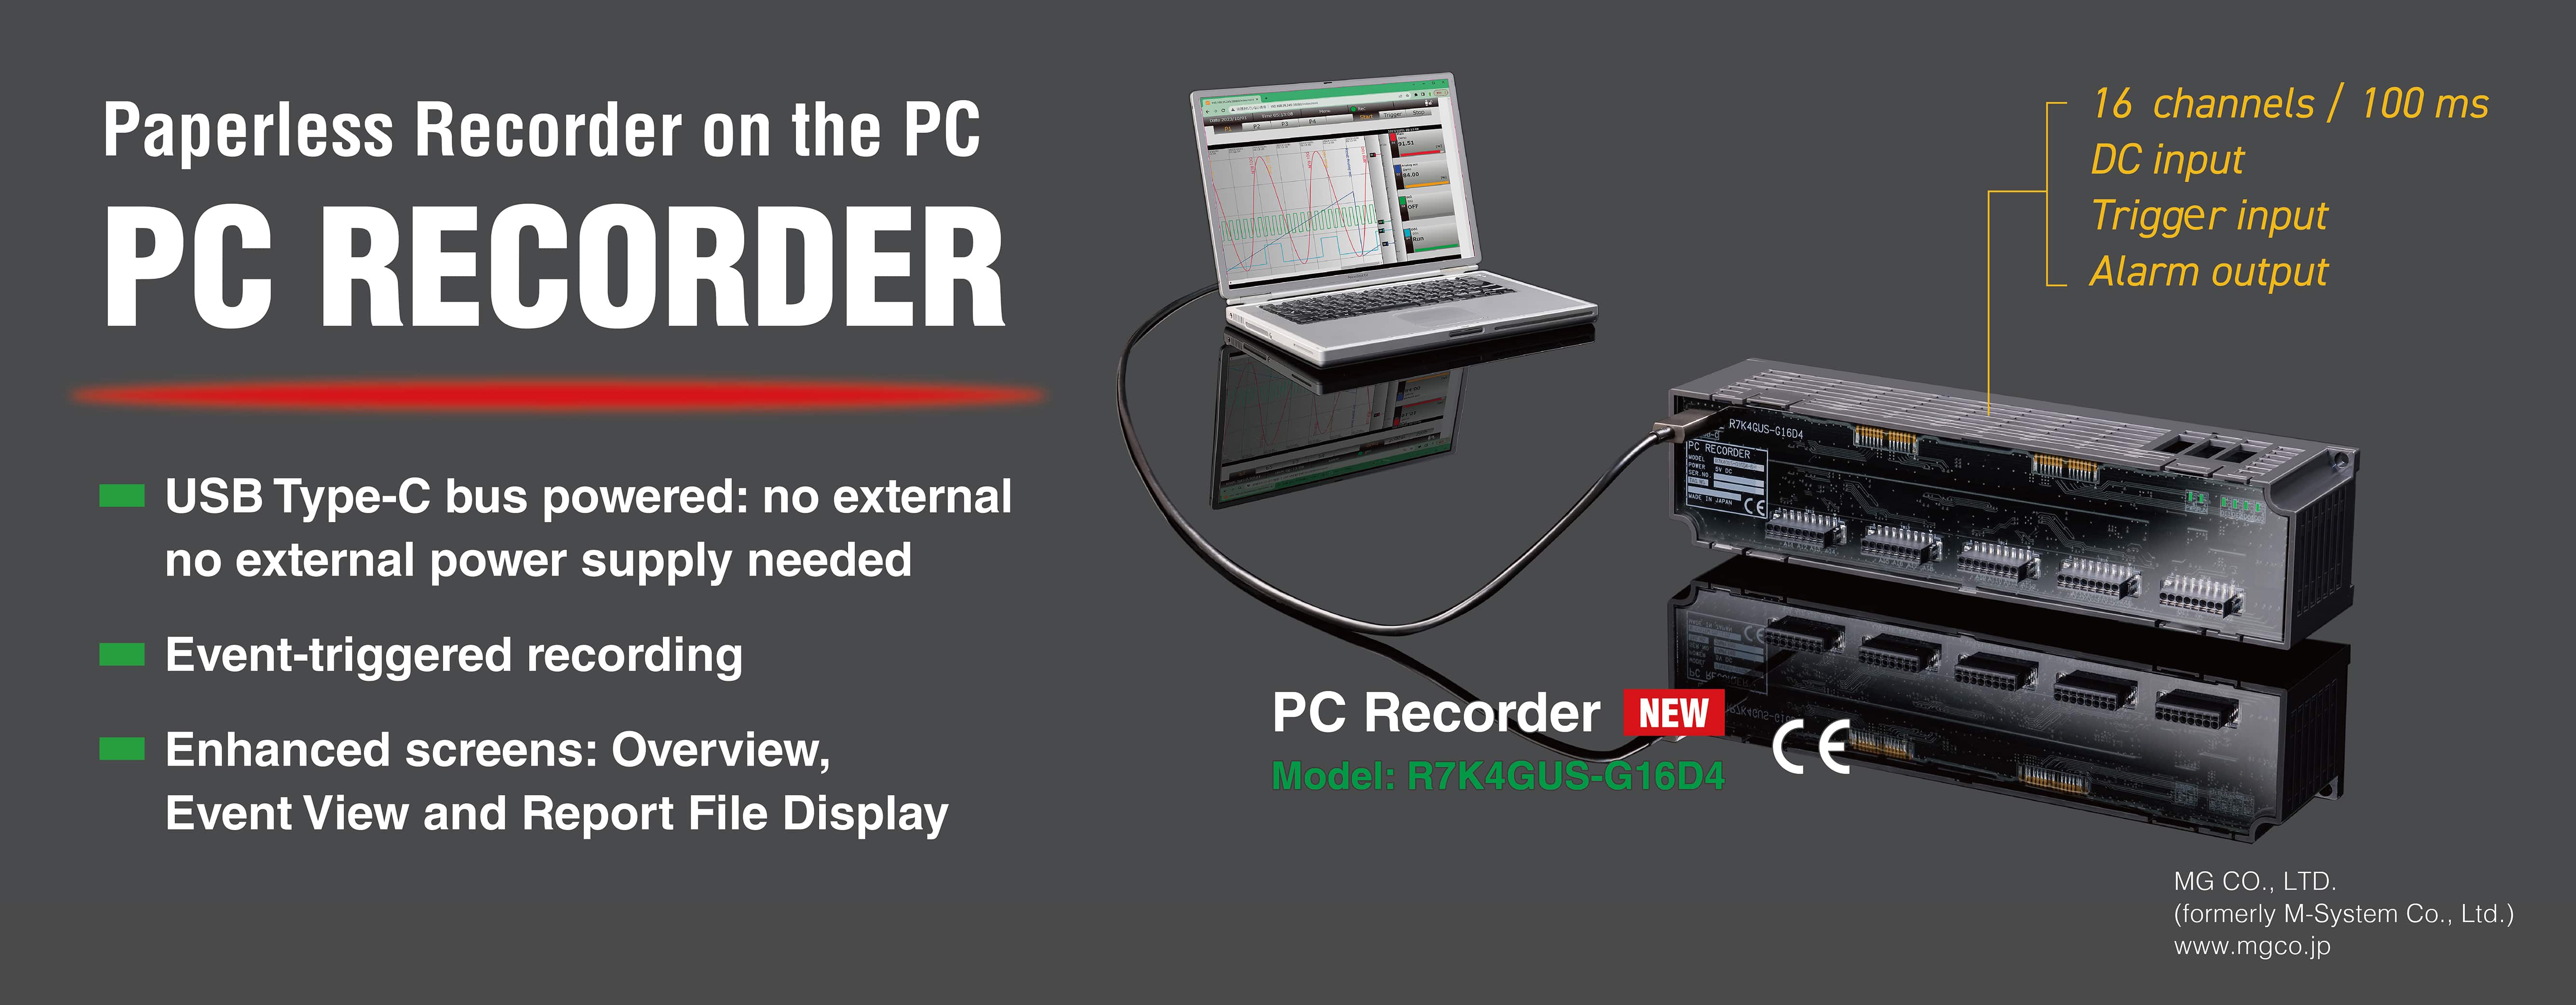 Paperless Recorder on the PC PC Recorder